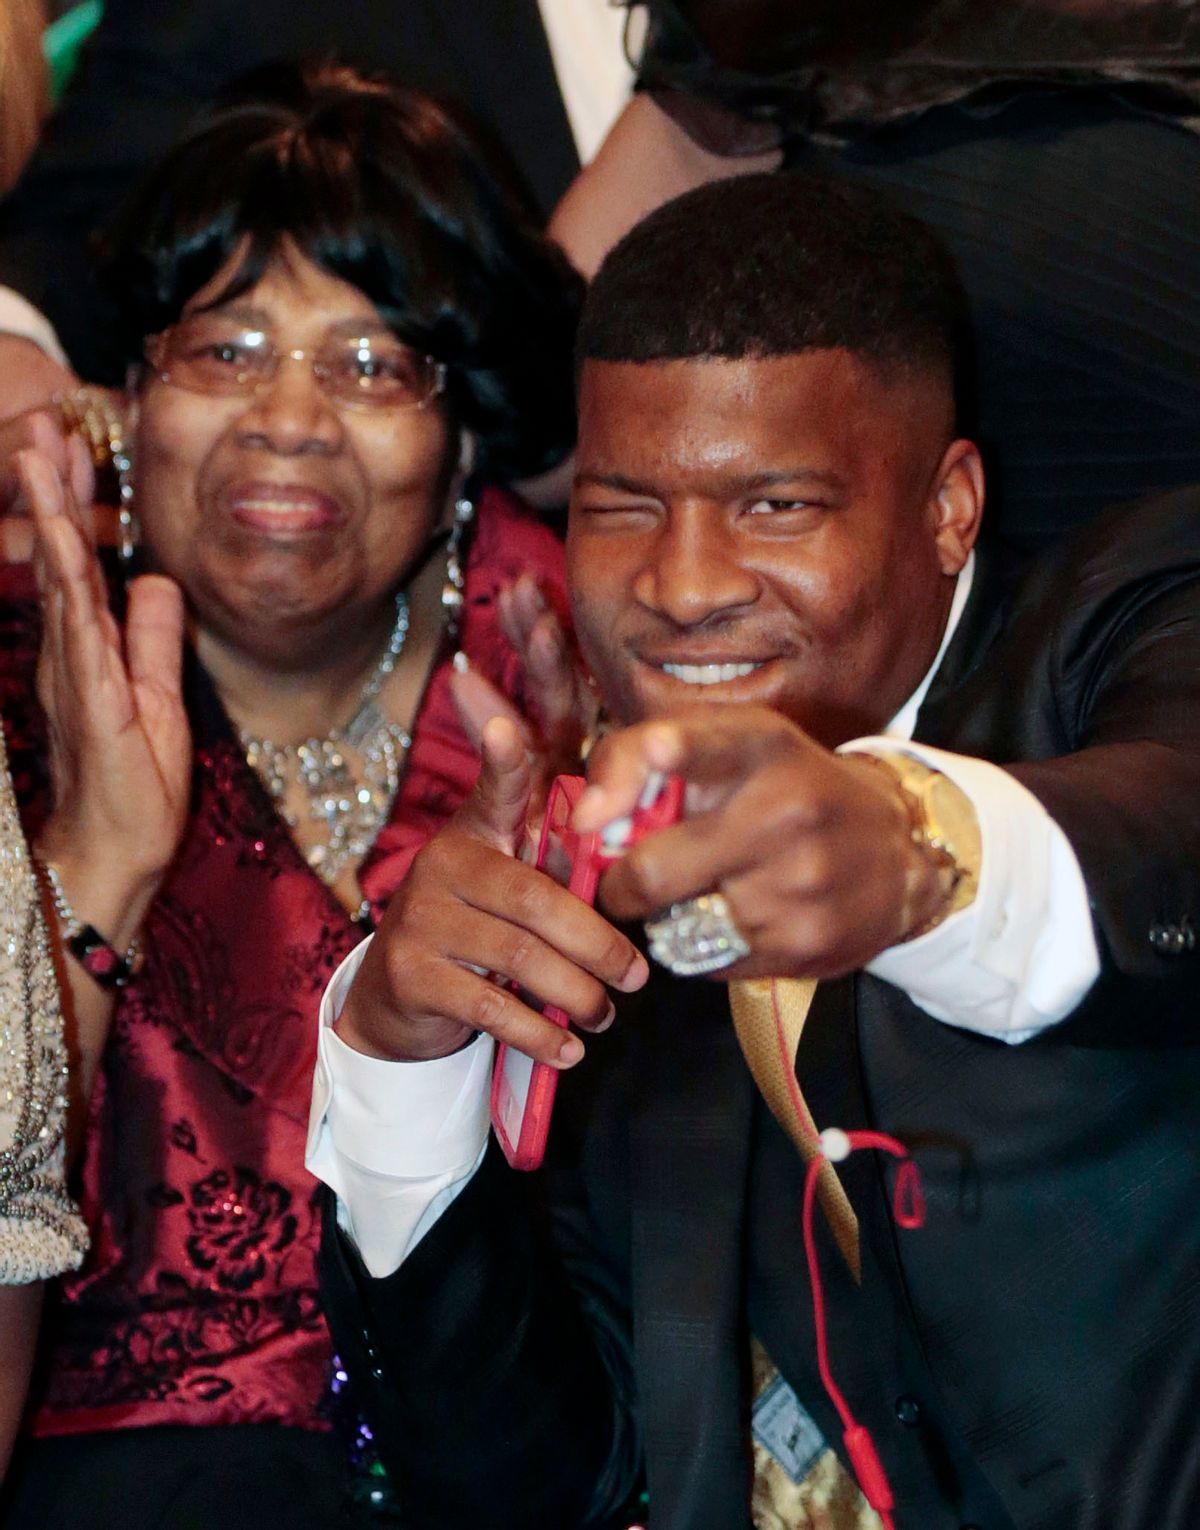 Jameis Winston reacts to the announcement with his Grandmother, Myrtle Winston, watching as the Tampa Bay Buccaneers select him as the number one draft pick in the 2015 NFL Draft, Thursday, April 30, 2015, in Bessemer, Ala. (AP Photo/Butch Dill)  (AP)